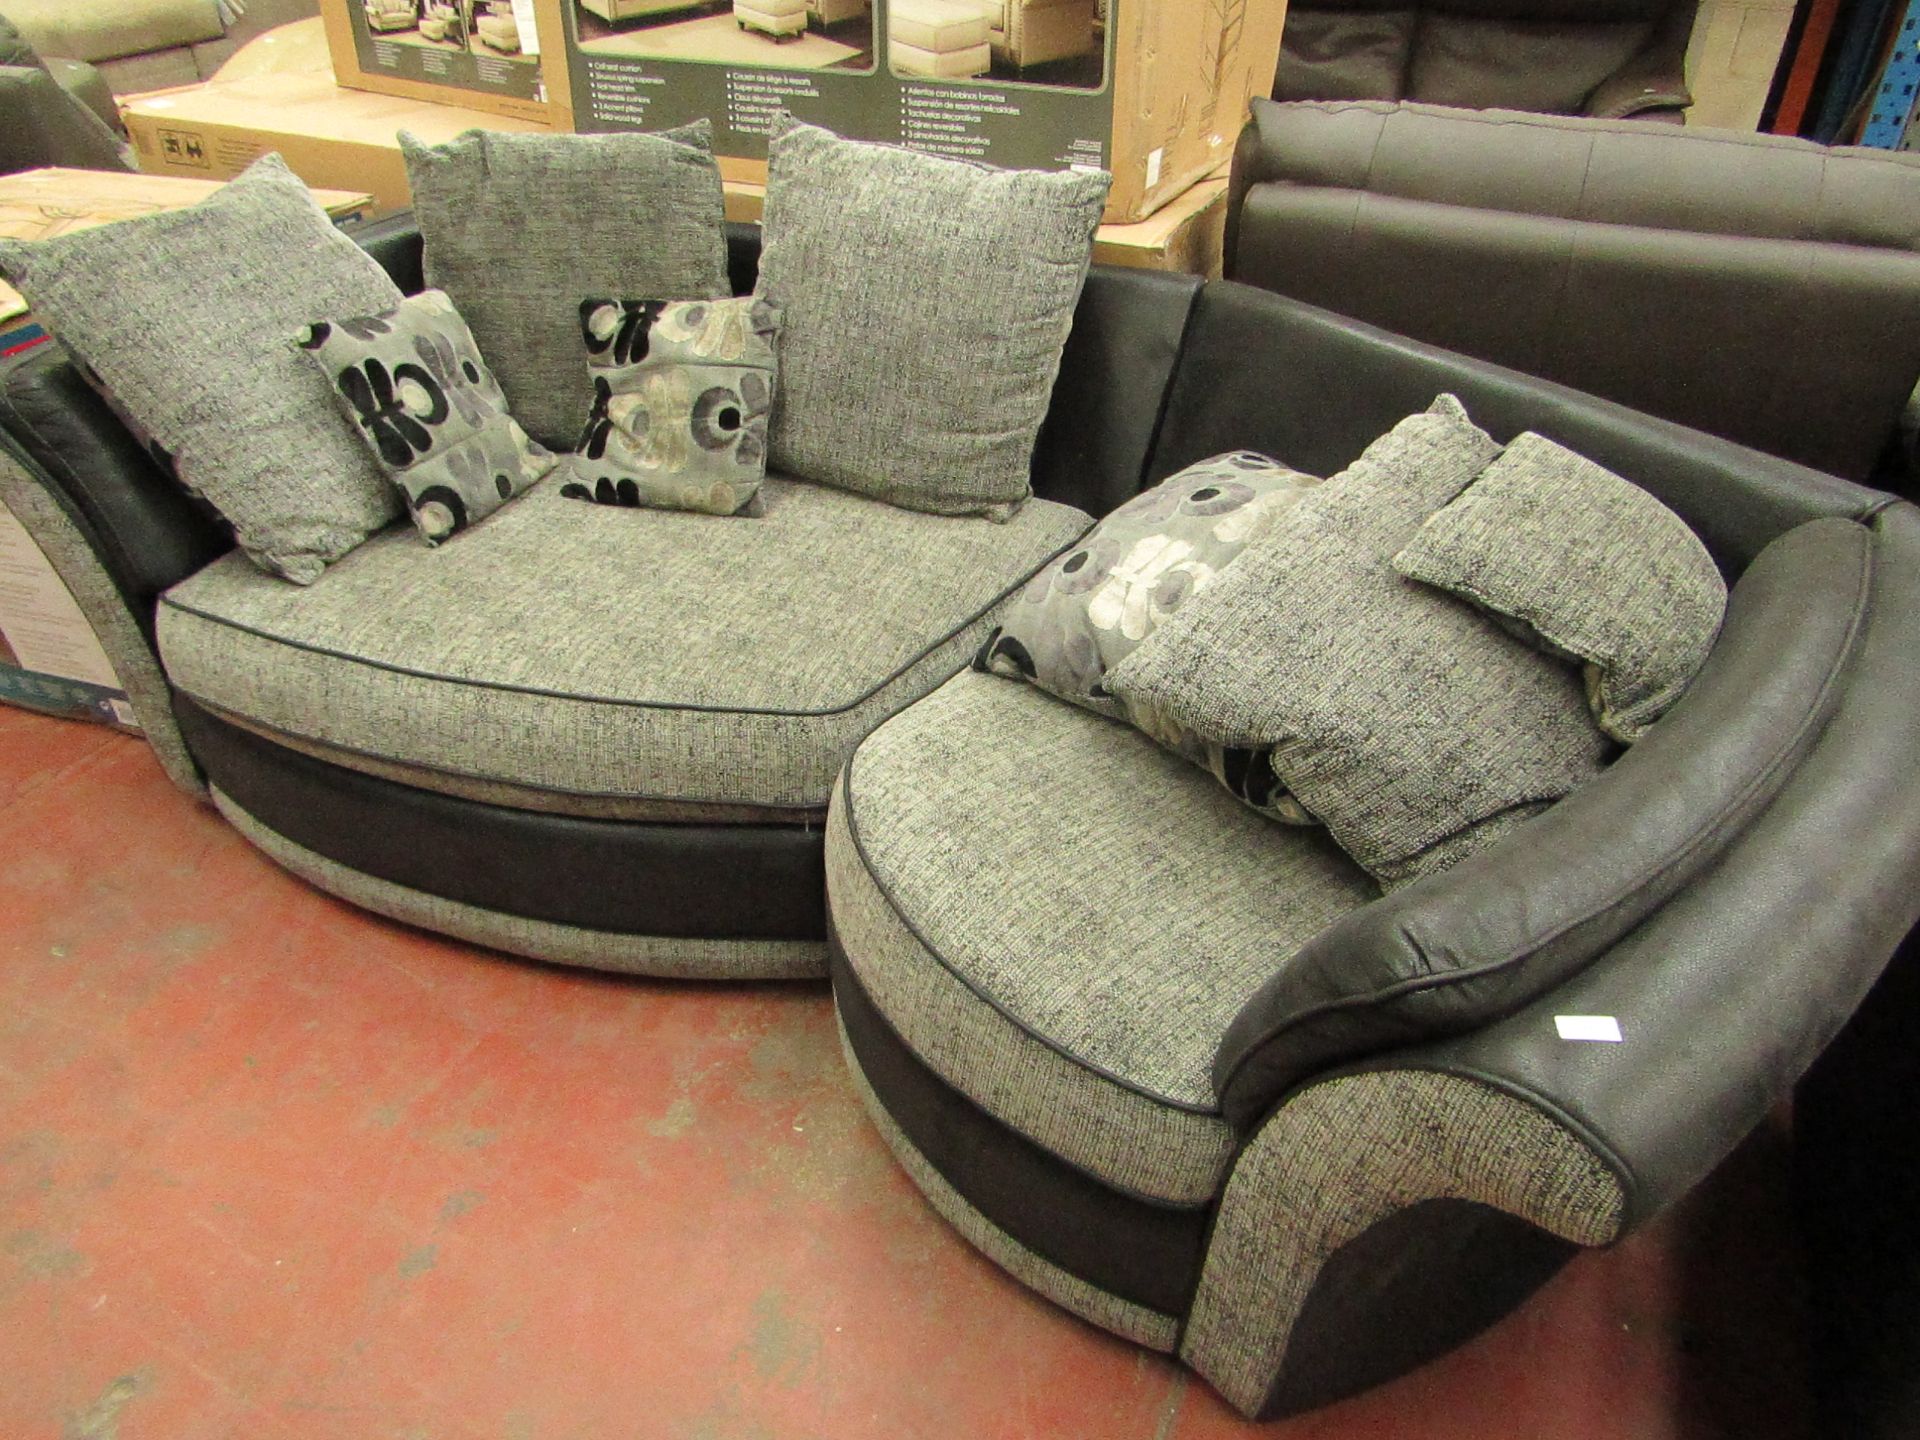 3 Seater angled sofa, no visible damage under quick inspection, comes with 8 cushions.